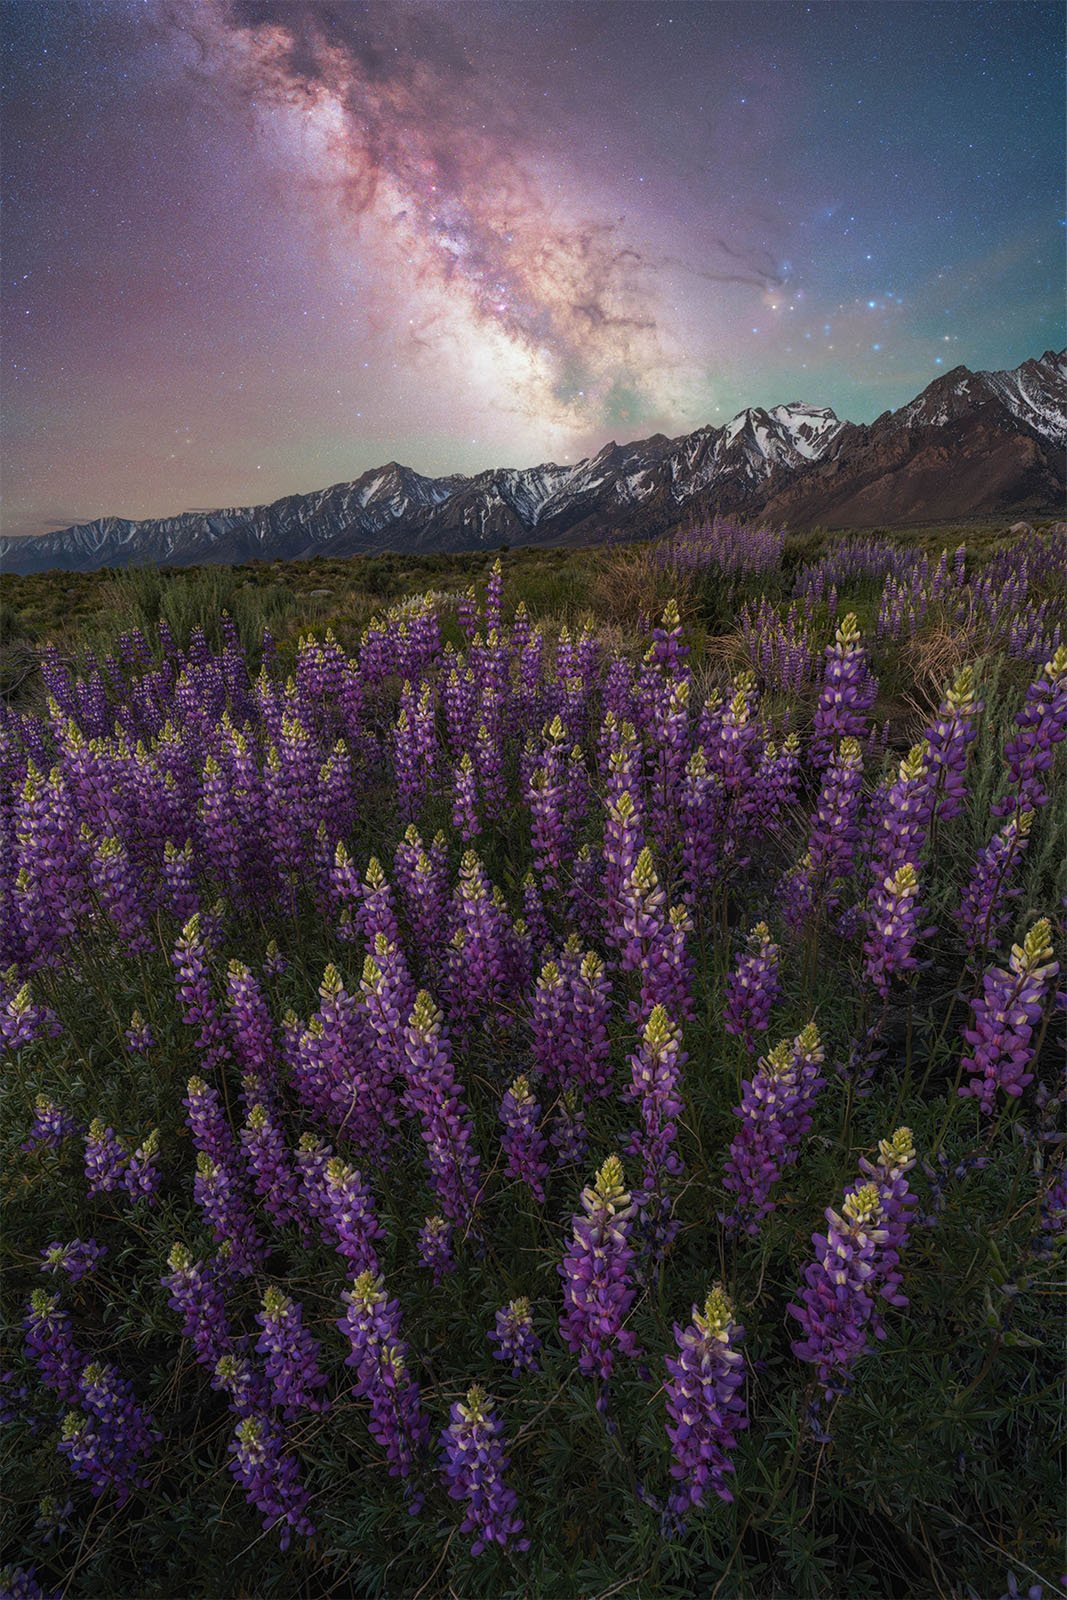  A field of vibrant purple lupine flowers stretches toward a majestic mountain range under a star-filled night sky. The Milky Way galaxy is prominently visible, arching above the rugged snow-capped peaks in the background.